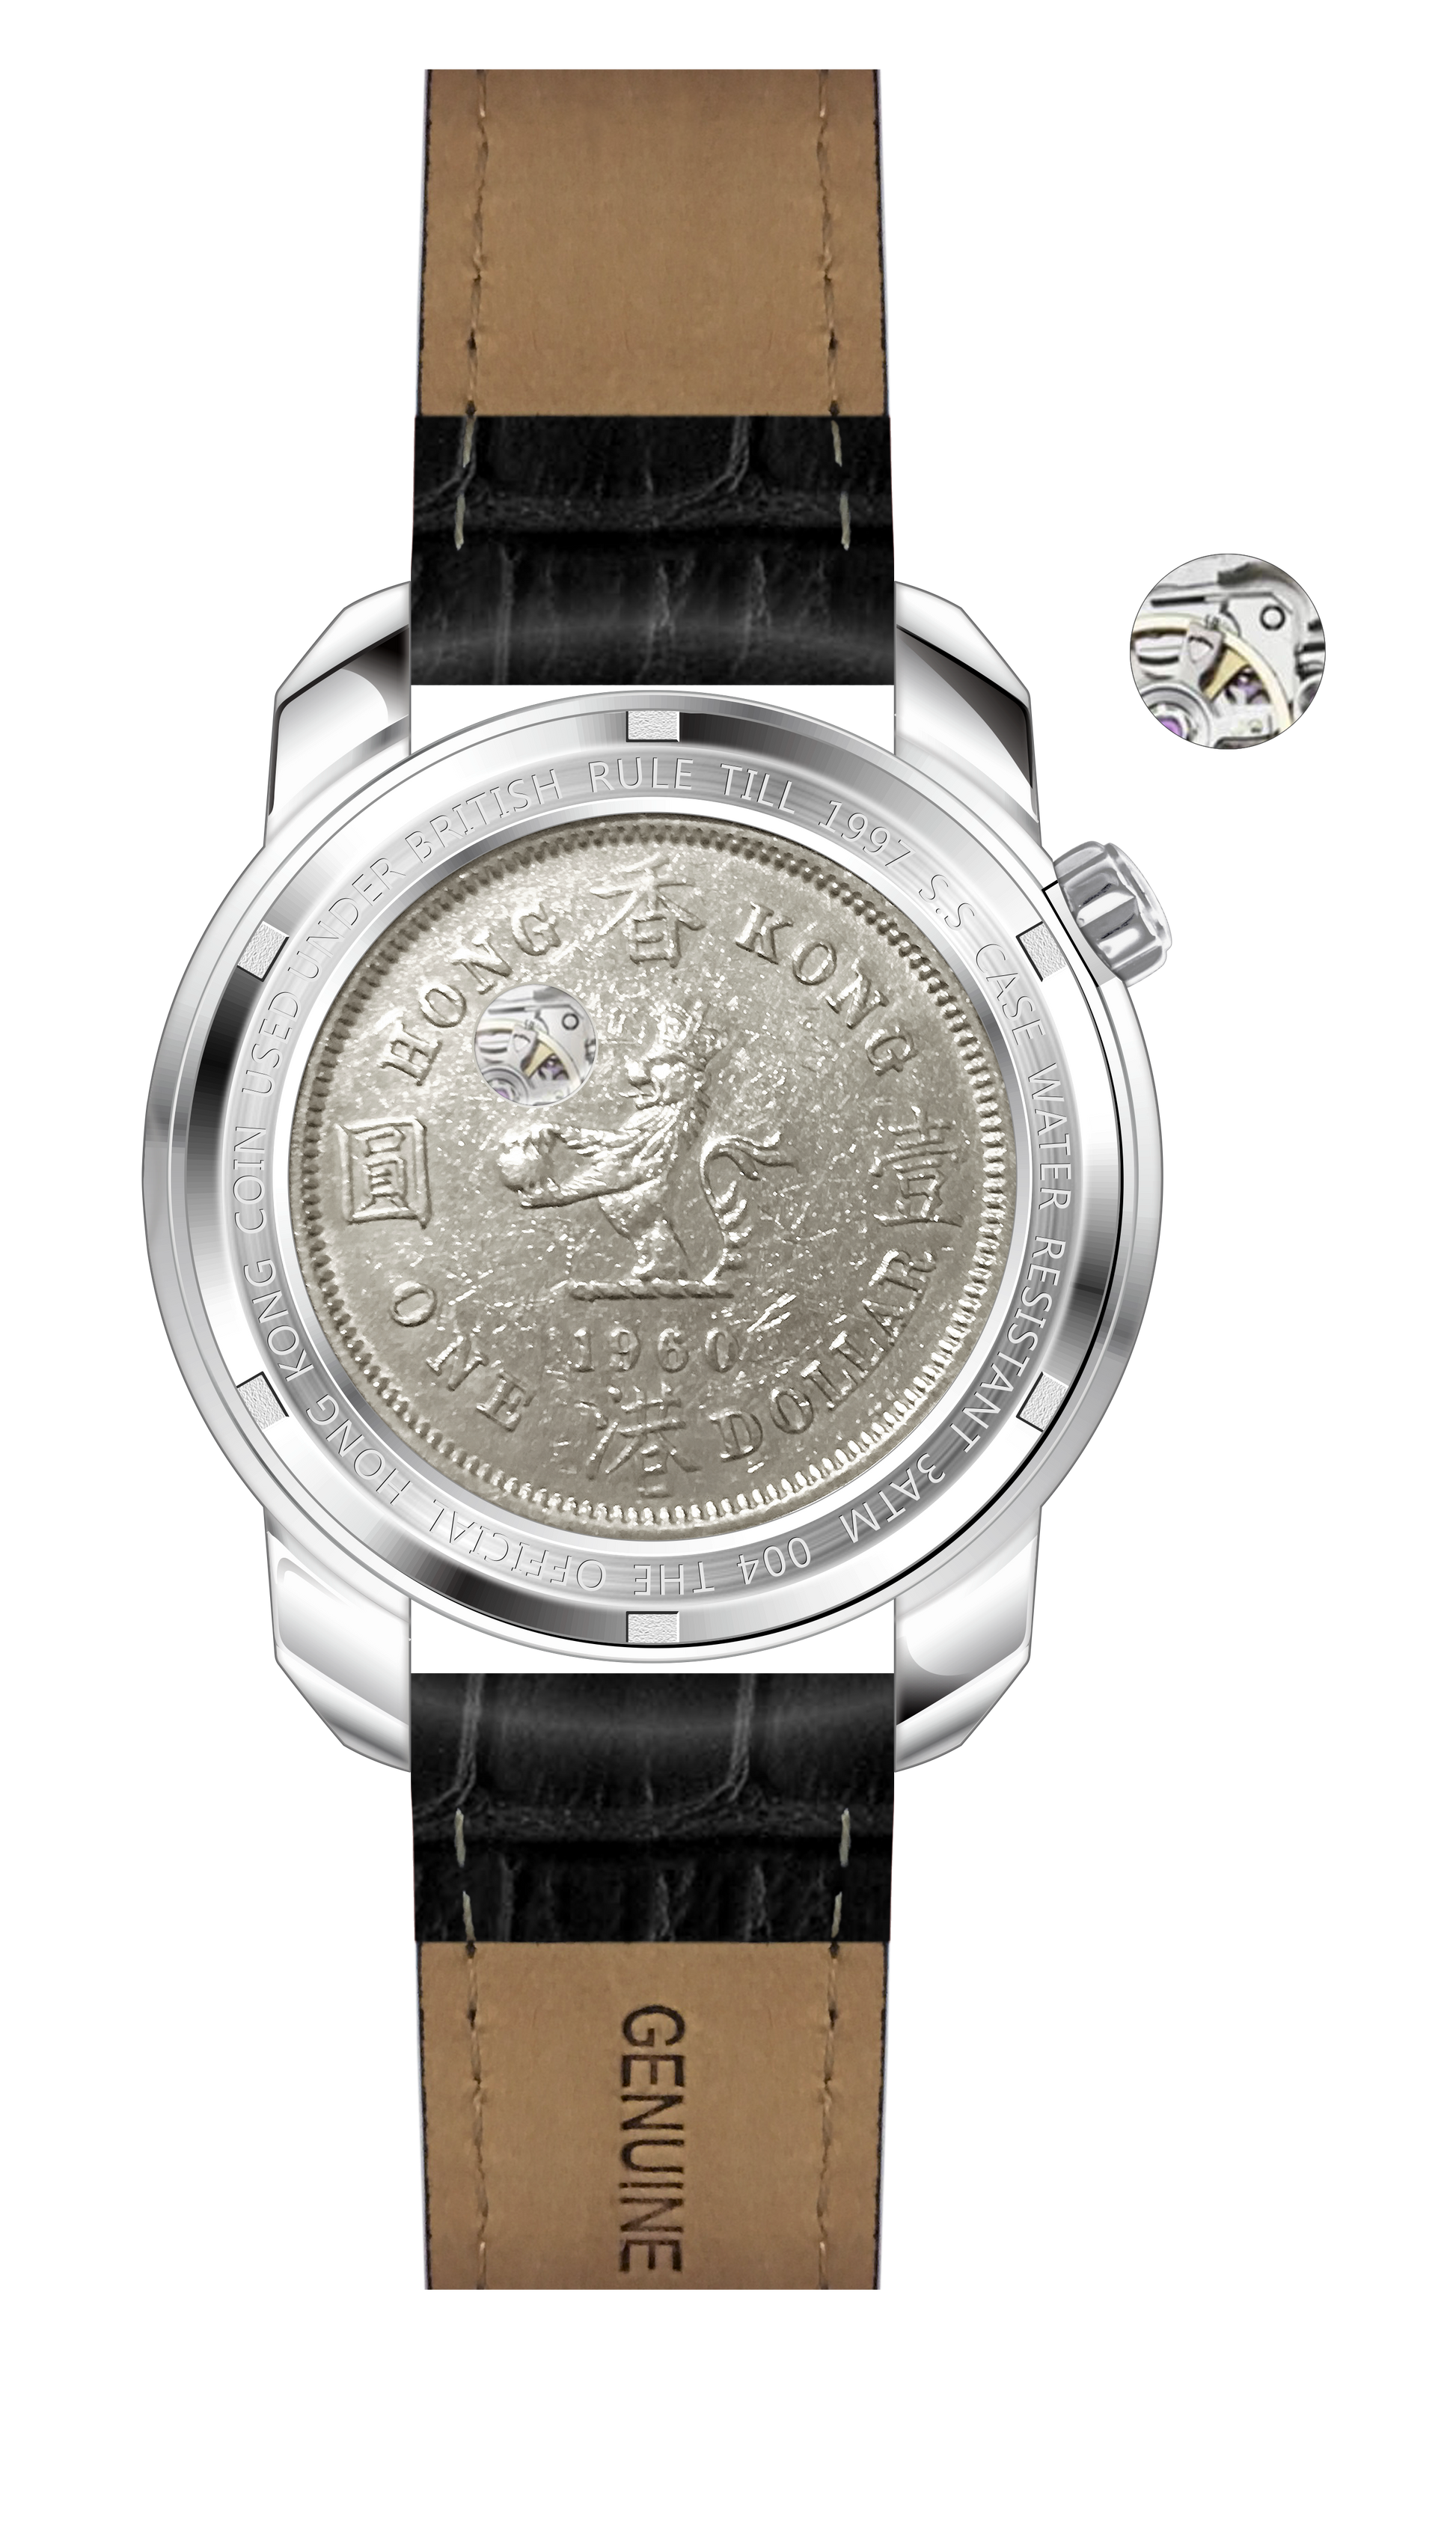 THE COIN AUTOMATICS ROSE GOLD - Urban Time Imagination